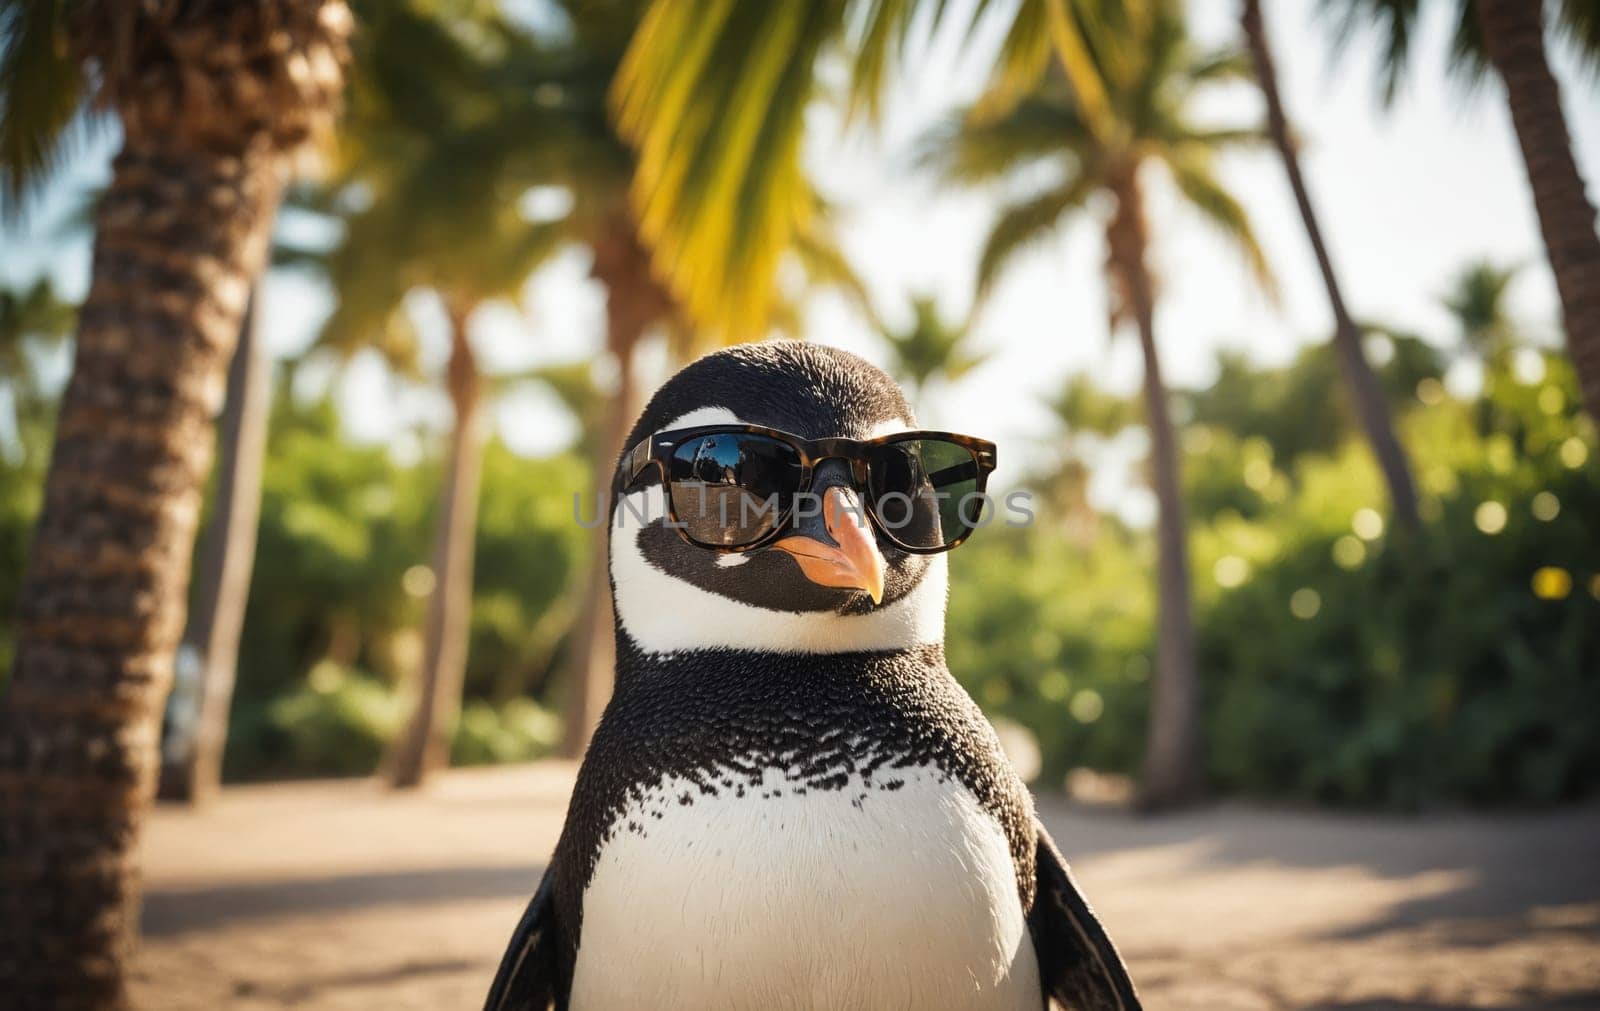 A Cool Summer Day: Penguin Rocking Sunglasses by Andre1ns